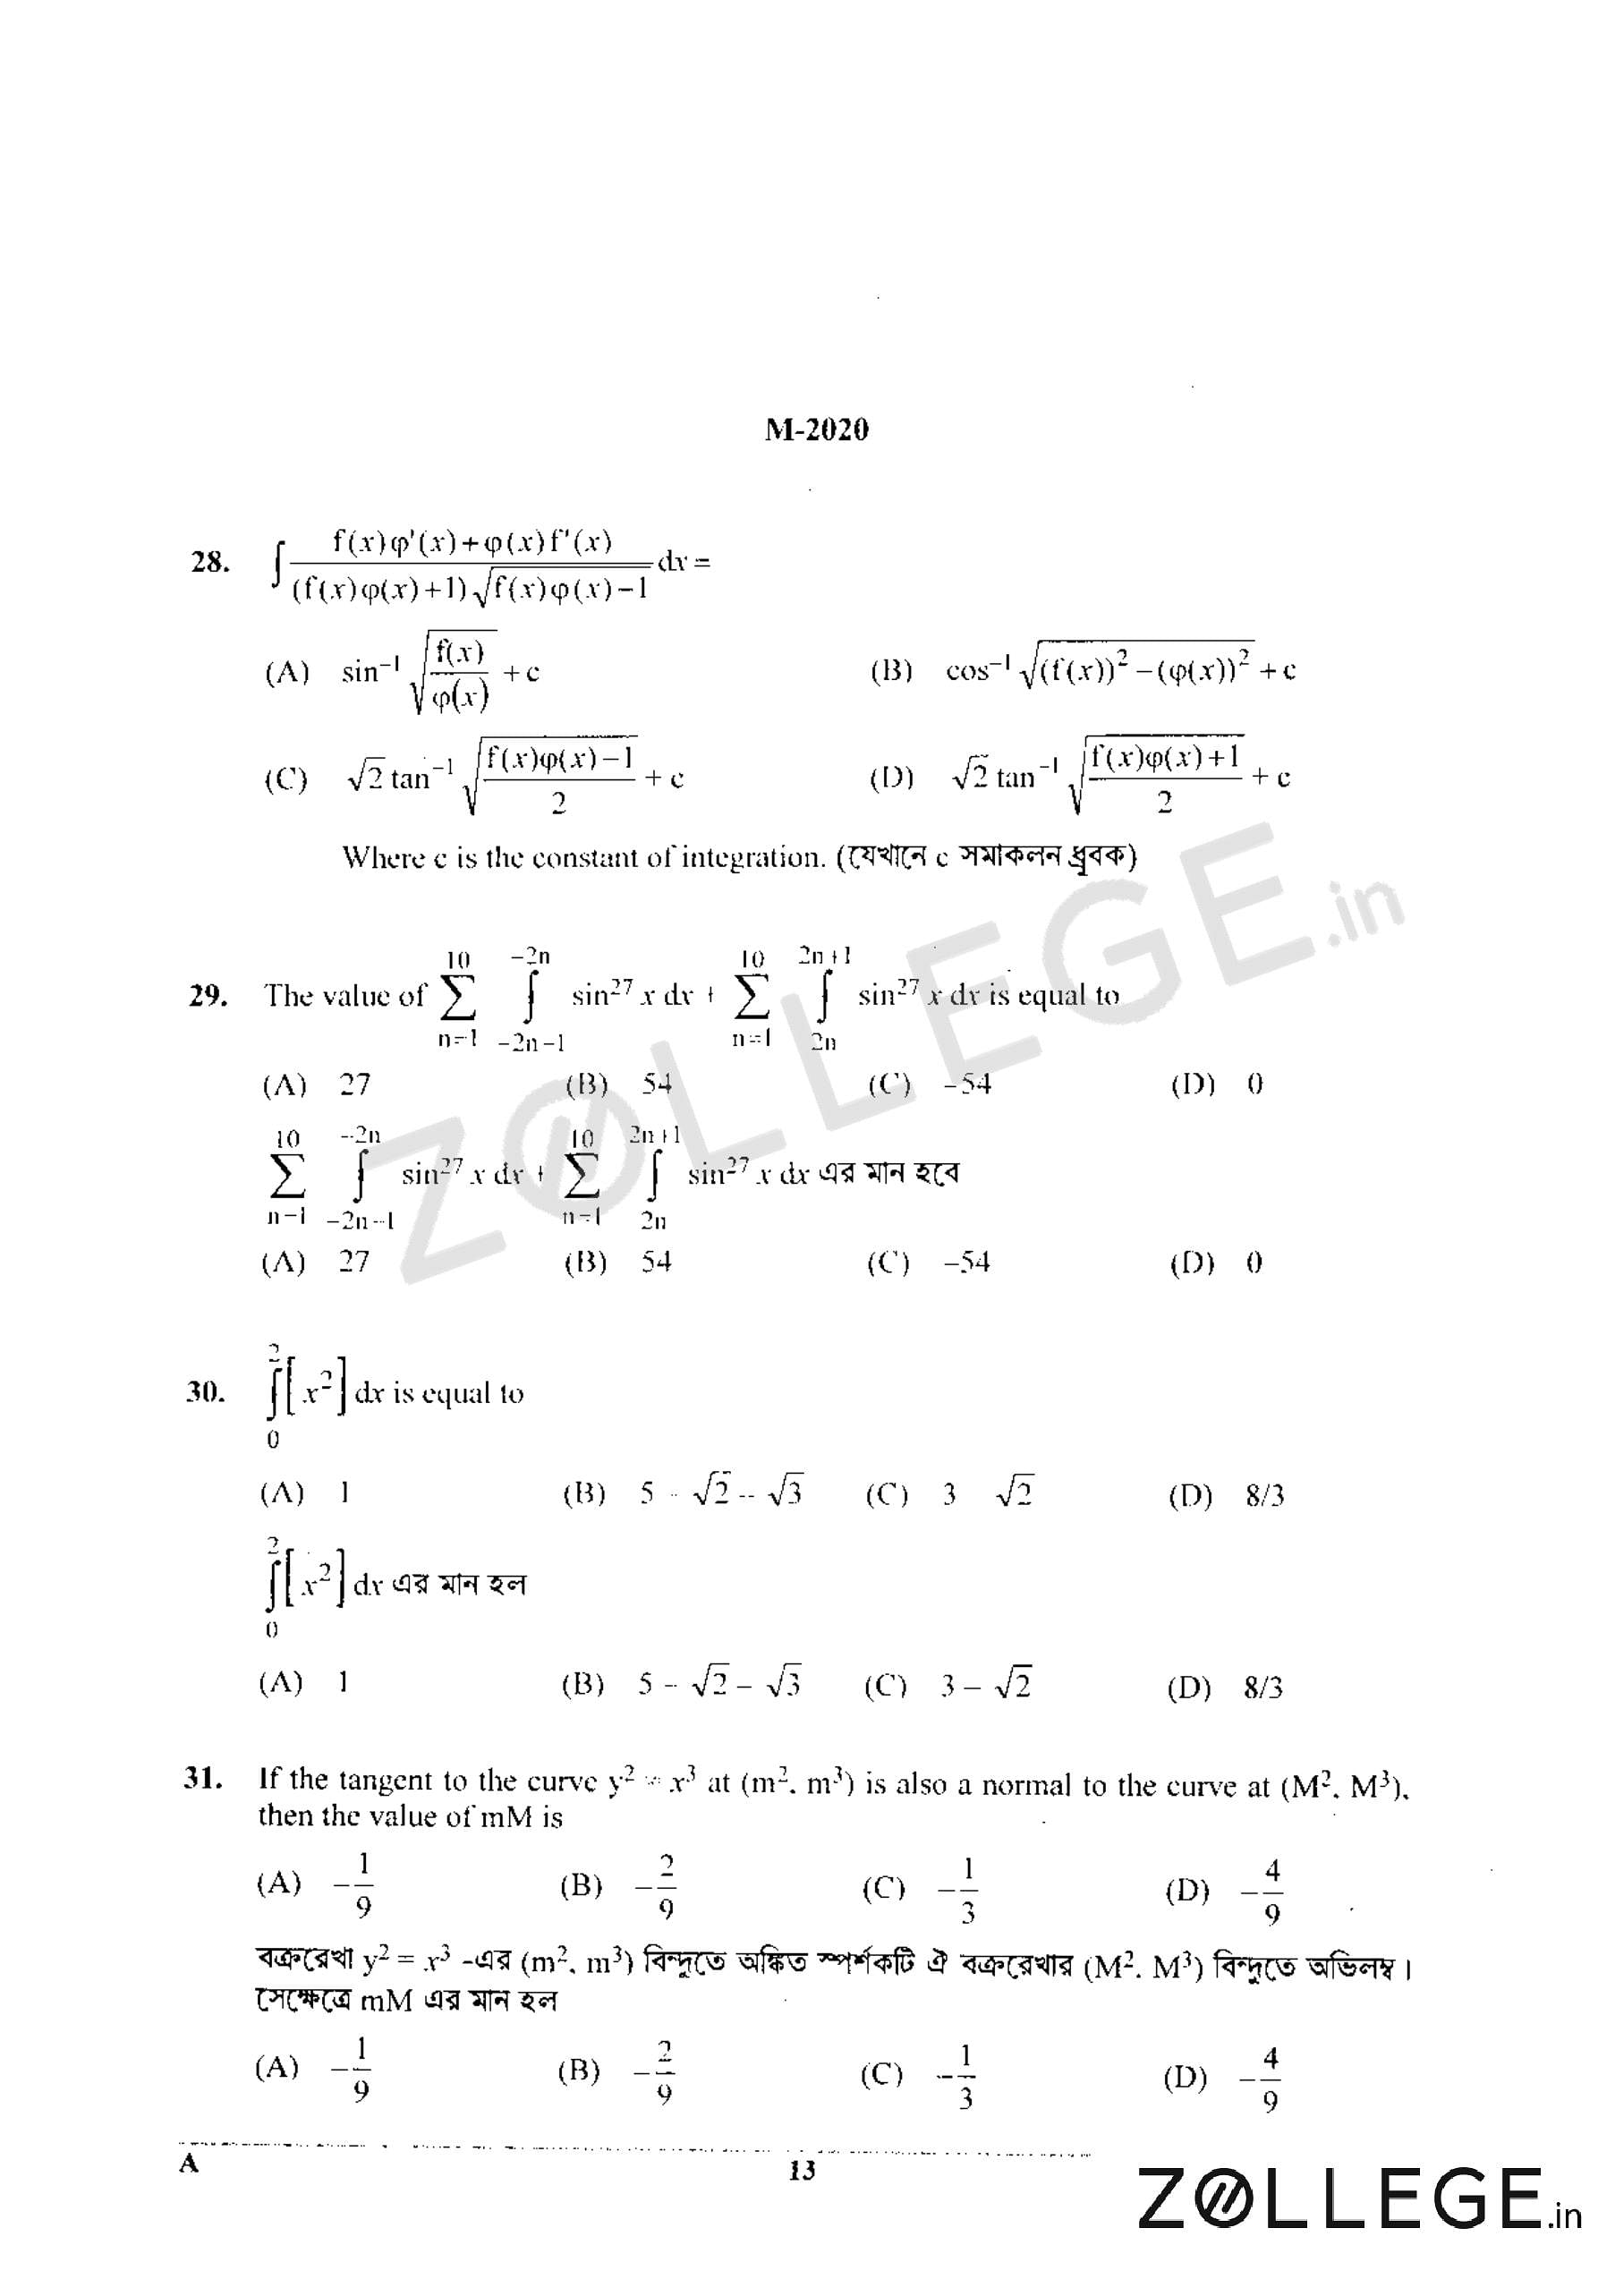 WBJEE 2020 Maths Solved Question Paper - Download PDF